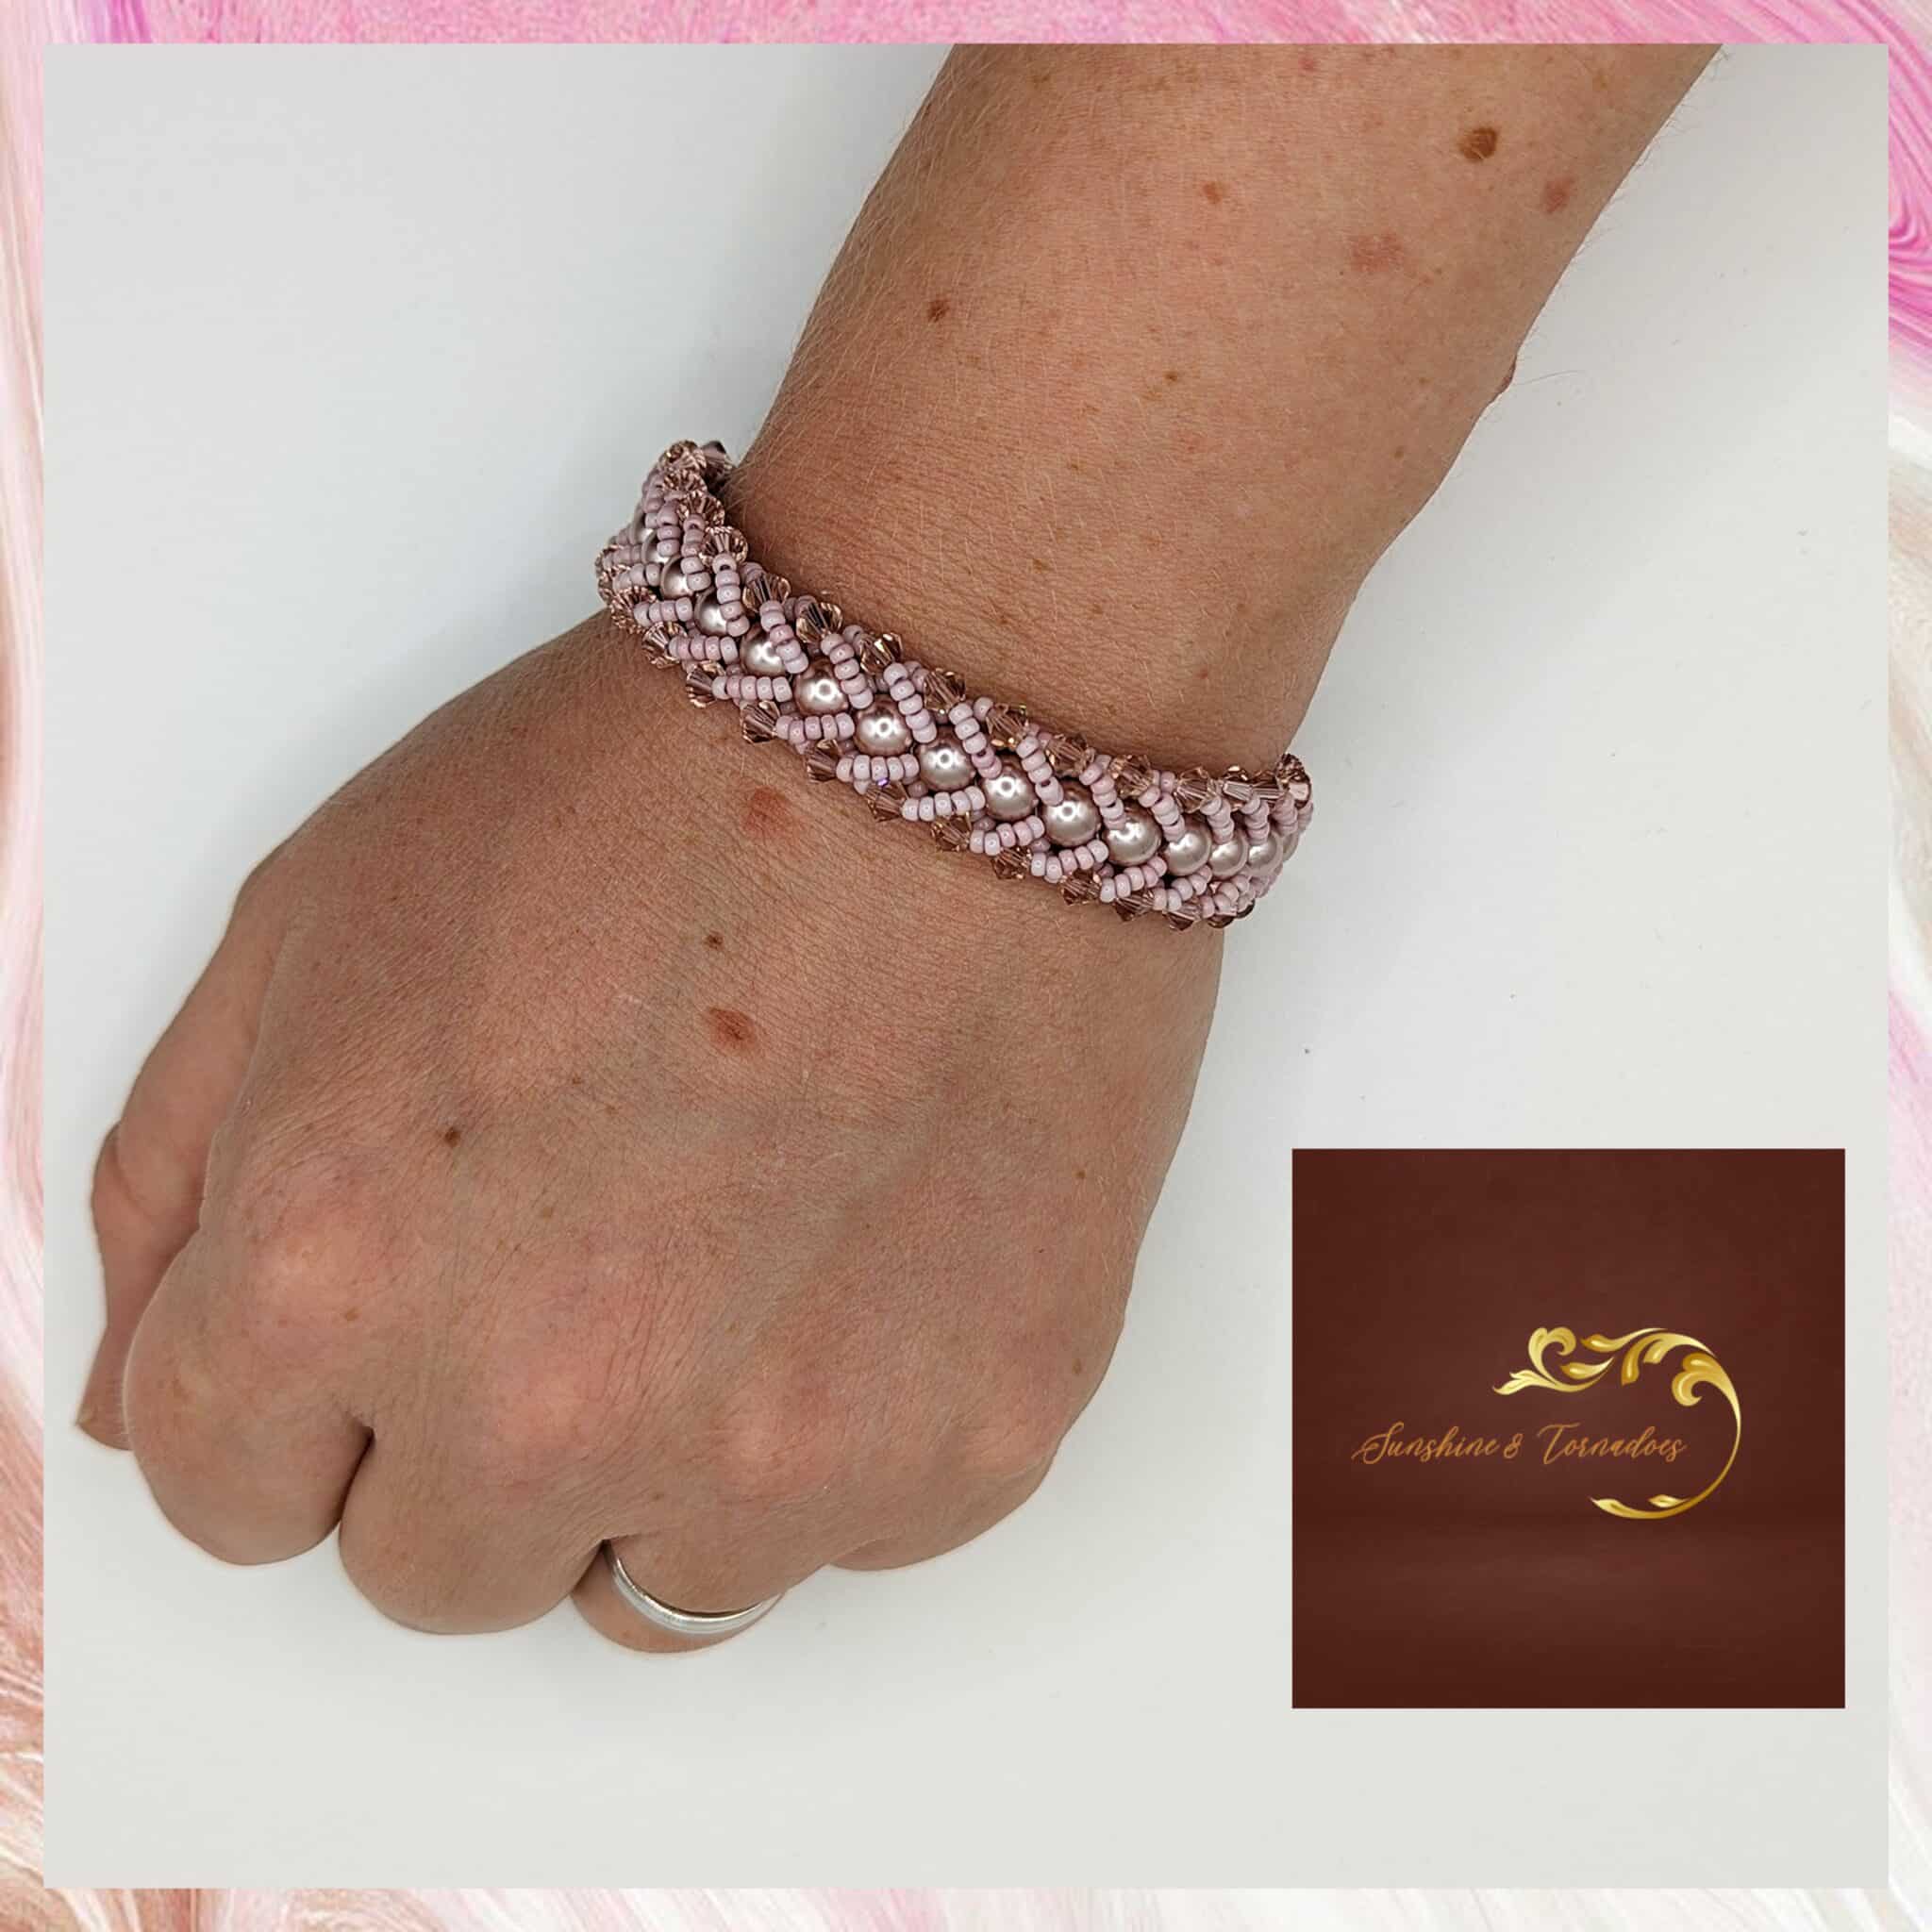 Blush Pink Flat Spiral Bracelet with Decorative Clasp - main product image